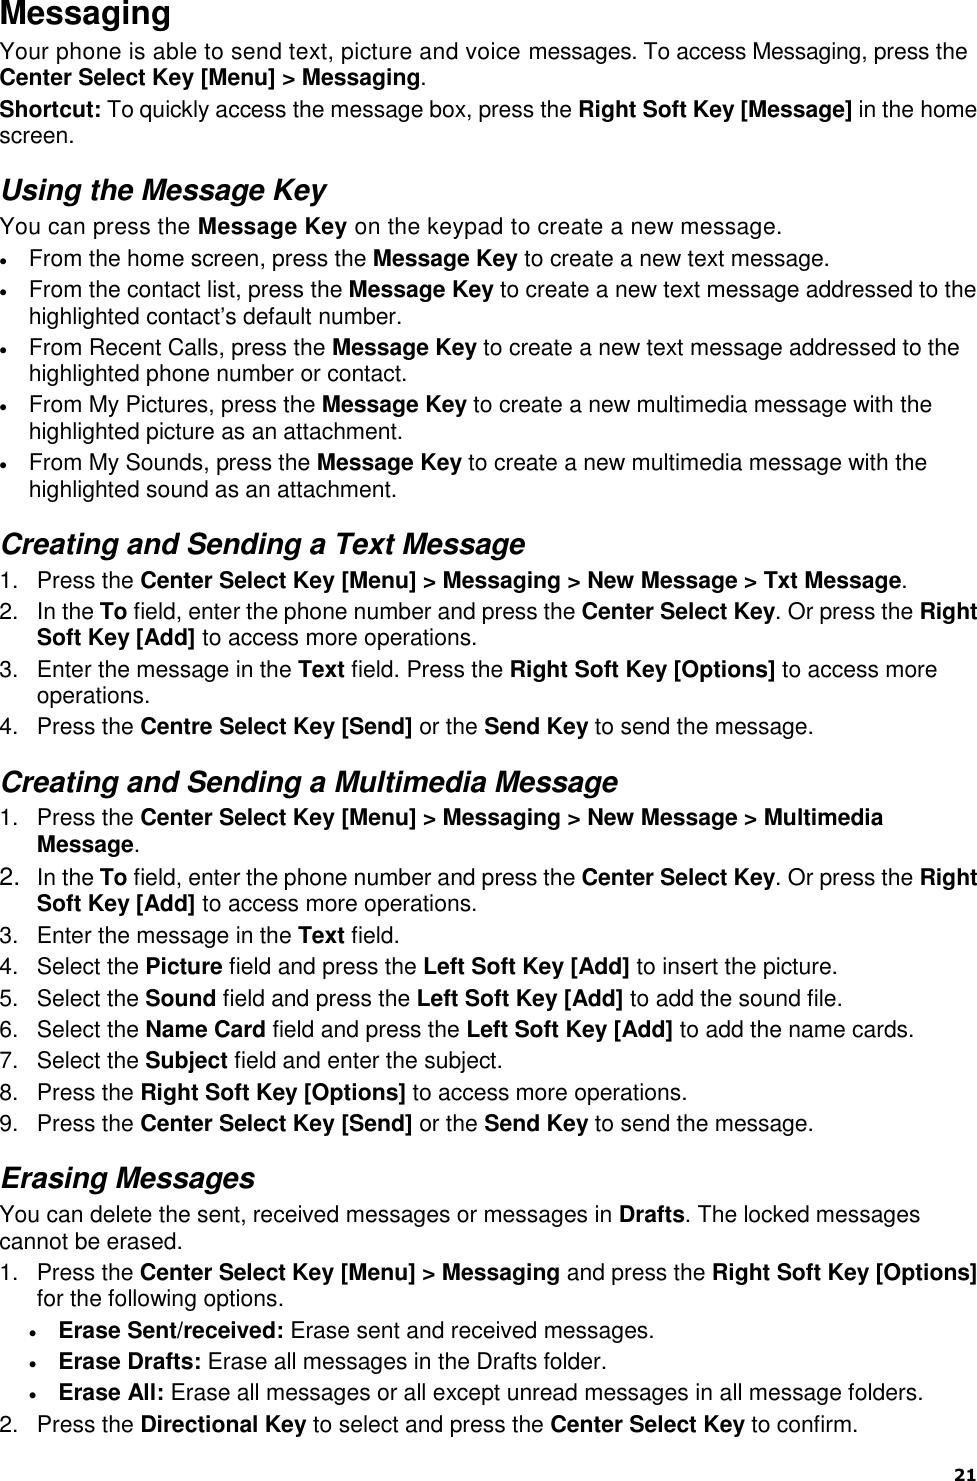  21   Messaging Your phone is able to send text, picture and voice messages. To access Messaging, press the Center Select Key [Menu] &gt; Messaging. Shortcut: To quickly access the message box, press the Right Soft Key [Message] in the home screen. Using the Message Key You can press the Message Key on the keypad to create a new message.  From the home screen, press the Message Key to create a new text message.  From the contact list, press the Message Key to create a new text message addressed to the highlighted contact‟s default number.  From Recent Calls, press the Message Key to create a new text message addressed to the highlighted phone number or contact.  From My Pictures, press the Message Key to create a new multimedia message with the highlighted picture as an attachment.  From My Sounds, press the Message Key to create a new multimedia message with the highlighted sound as an attachment. Creating and Sending a Text Message 1.  Press the Center Select Key [Menu] &gt; Messaging &gt; New Message &gt; Txt Message. 2.  In the To field, enter the phone number and press the Center Select Key. Or press the Right Soft Key [Add] to access more operations. 3.  Enter the message in the Text field. Press the Right Soft Key [Options] to access more operations. 4.  Press the Centre Select Key [Send] or the Send Key to send the message. Creating and Sending a Multimedia Message 1.  Press the Center Select Key [Menu] &gt; Messaging &gt; New Message &gt; Multimedia Message. 2. In the To field, enter the phone number and press the Center Select Key. Or press the Right Soft Key [Add] to access more operations. 3.  Enter the message in the Text field. 4.  Select the Picture field and press the Left Soft Key [Add] to insert the picture. 5.  Select the Sound field and press the Left Soft Key [Add] to add the sound file. 6.  Select the Name Card field and press the Left Soft Key [Add] to add the name cards. 7.  Select the Subject field and enter the subject. 8.  Press the Right Soft Key [Options] to access more operations. 9.  Press the Center Select Key [Send] or the Send Key to send the message. Erasing Messages You can delete the sent, received messages or messages in Drafts. The locked messages cannot be erased. 1.  Press the Center Select Key [Menu] &gt; Messaging and press the Right Soft Key [Options] for the following options.  Erase Sent/received: Erase sent and received messages.  Erase Drafts: Erase all messages in the Drafts folder.  Erase All: Erase all messages or all except unread messages in all message folders. 2.  Press the Directional Key to select and press the Center Select Key to confirm. 